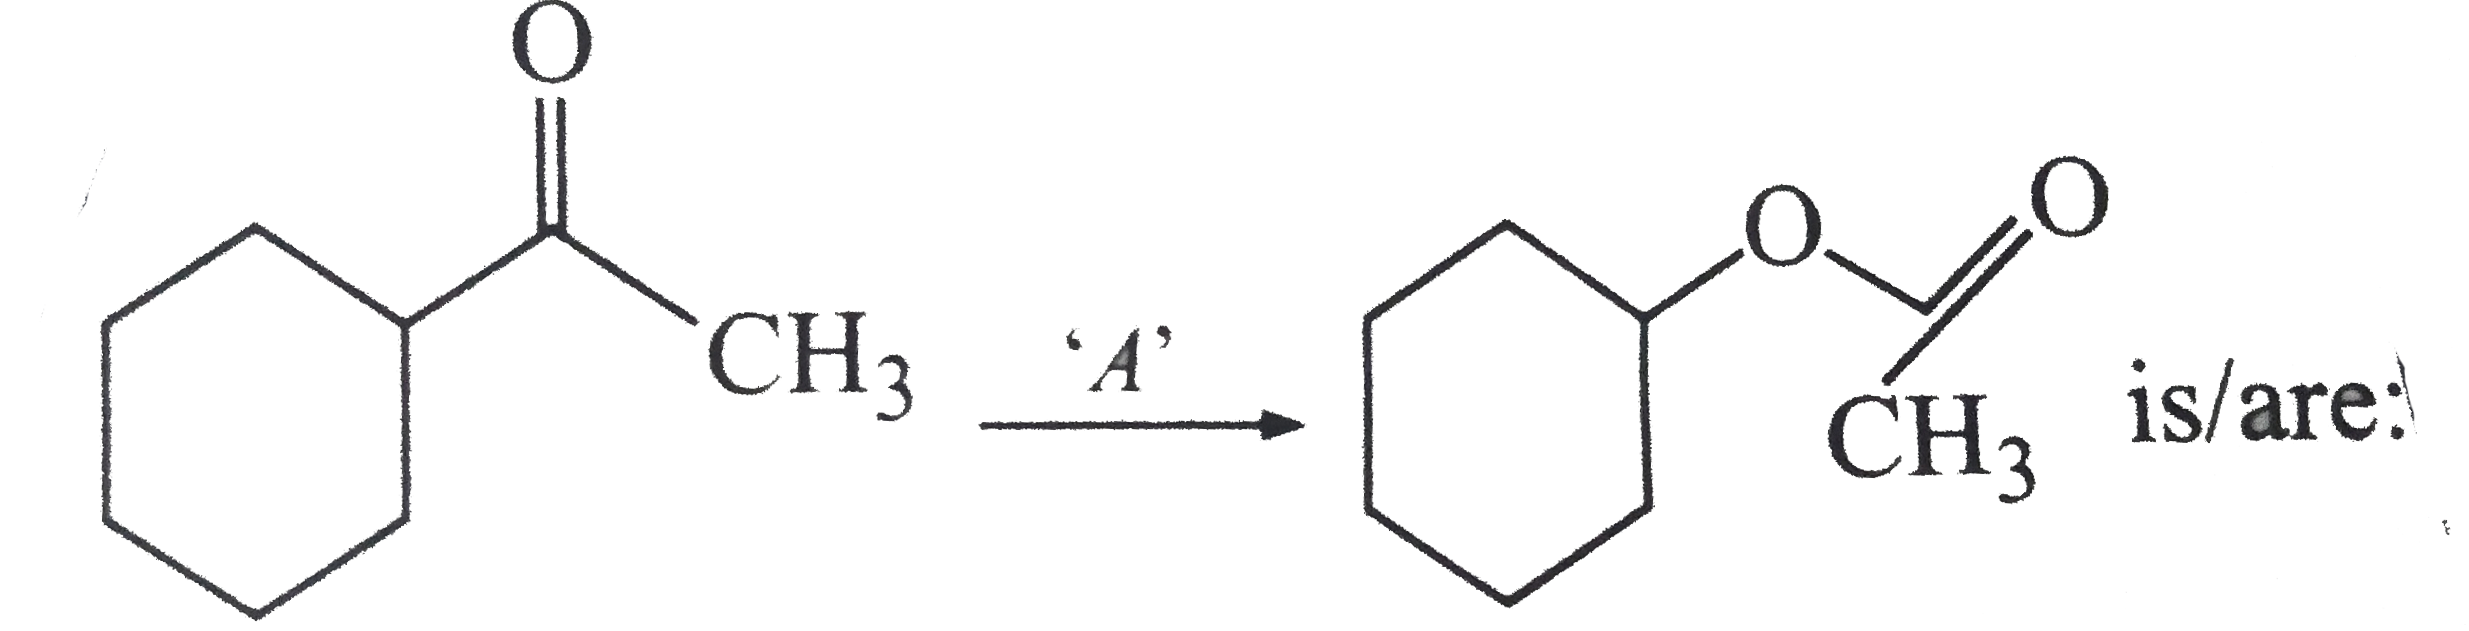 The most suitable reagent 'A' for the reaction